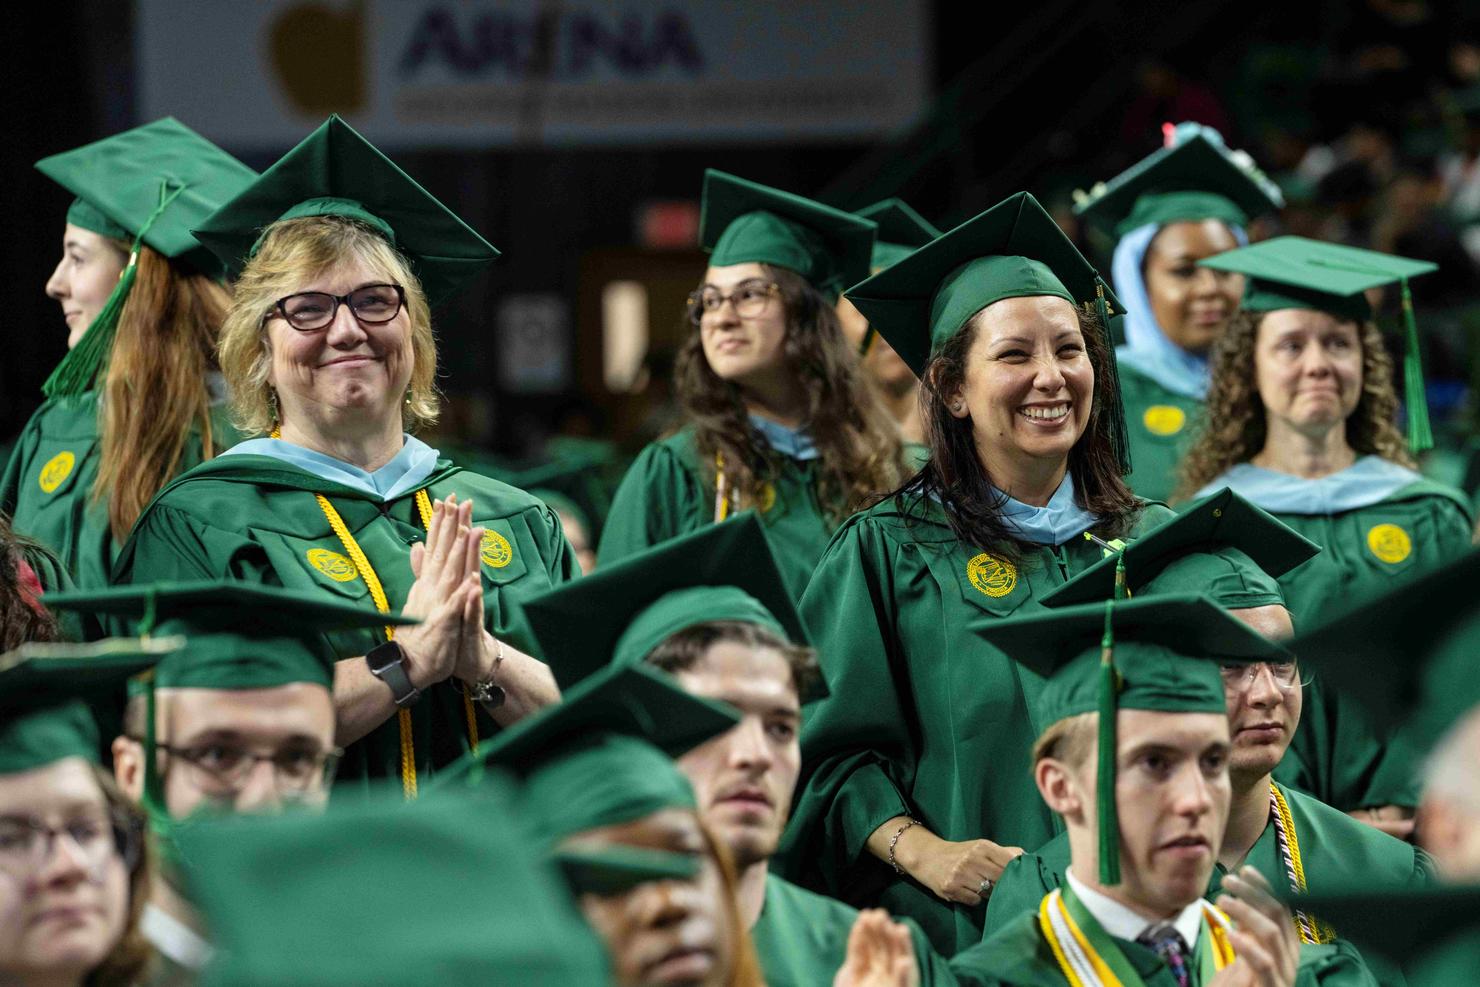 Graduates listen to speakers at Commencement ceremony